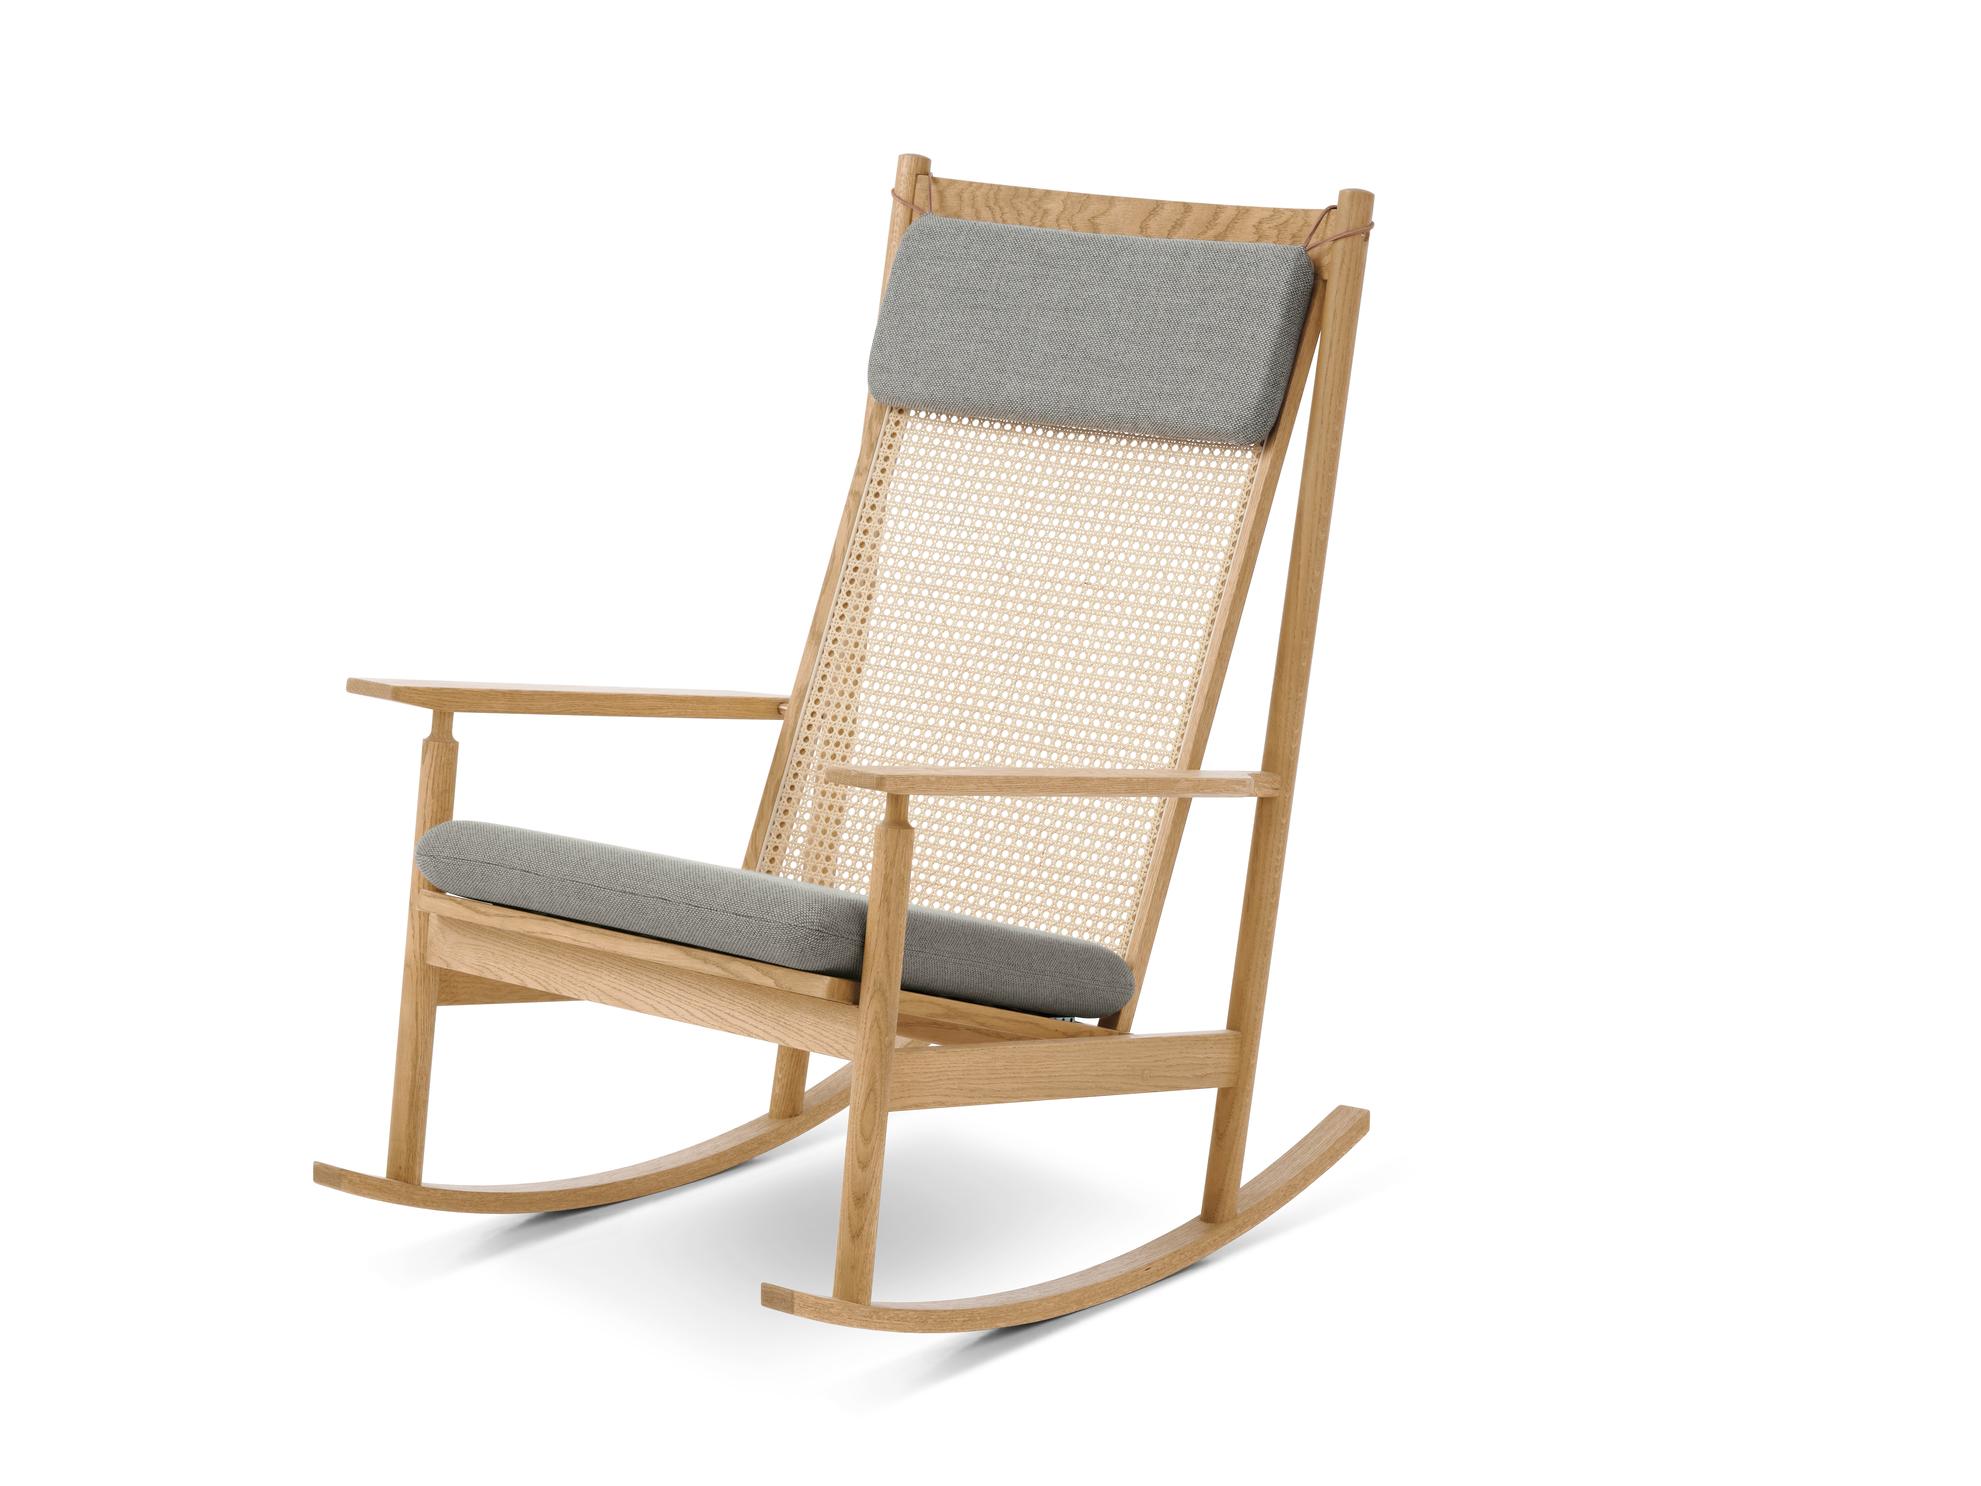 Swing rocking chair rewool oak granite by Warm Nordic
Dimensions: D91 x W68 x H 103 cm
Material: Wood, Foam, Rubber springs, French cane, Textile or leather upholstery, Oak
Weight: 16.5 kg
Also available in different colours, materials and